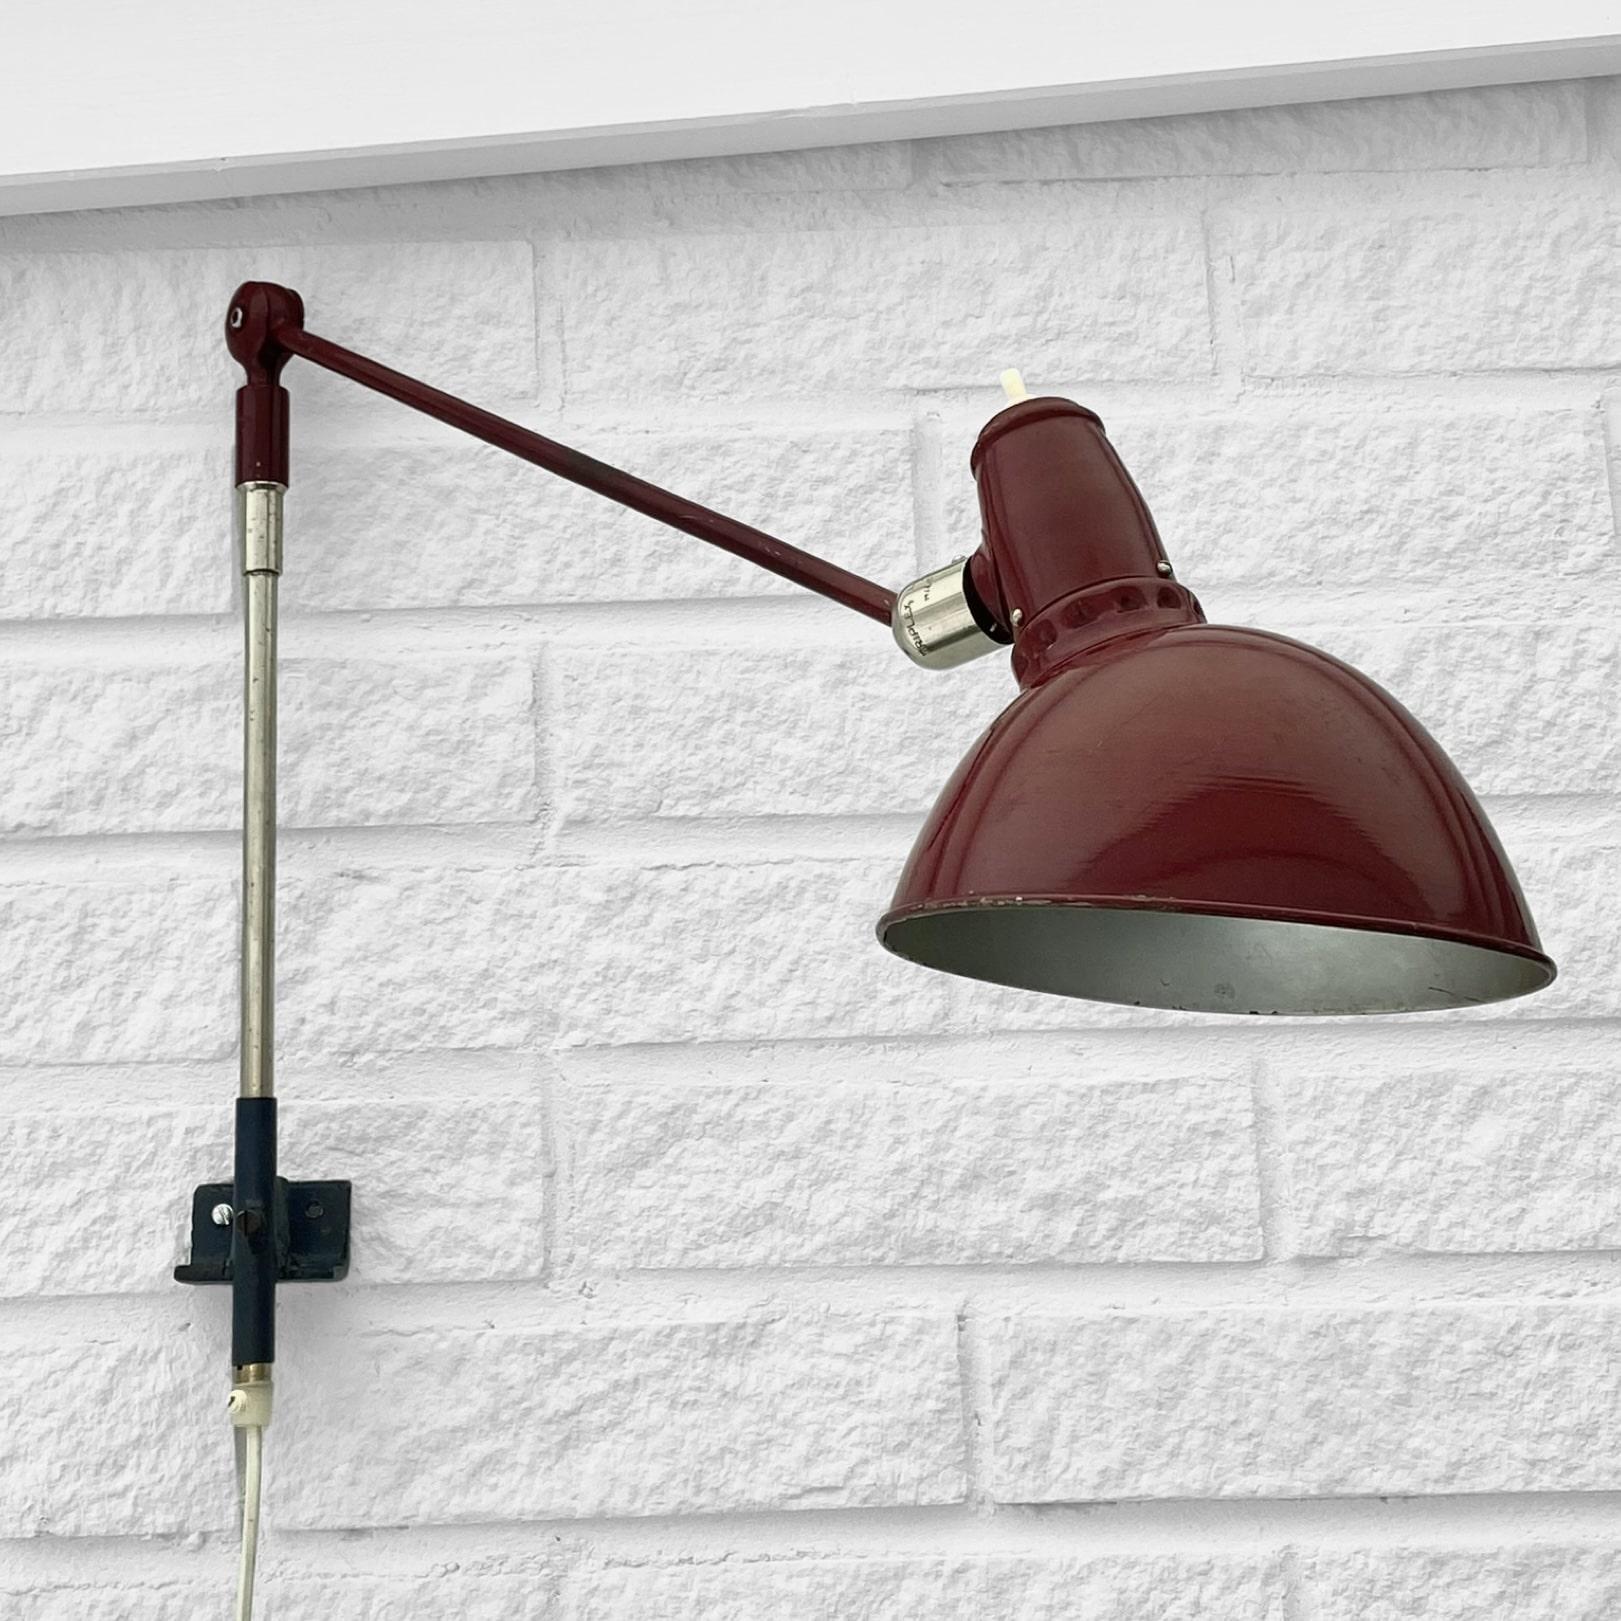 Industrial lamp Triplex Lillpendel by Johan Petter Johansson, Sweden, 1940s In Good Condition For Sale In Forserum, SE